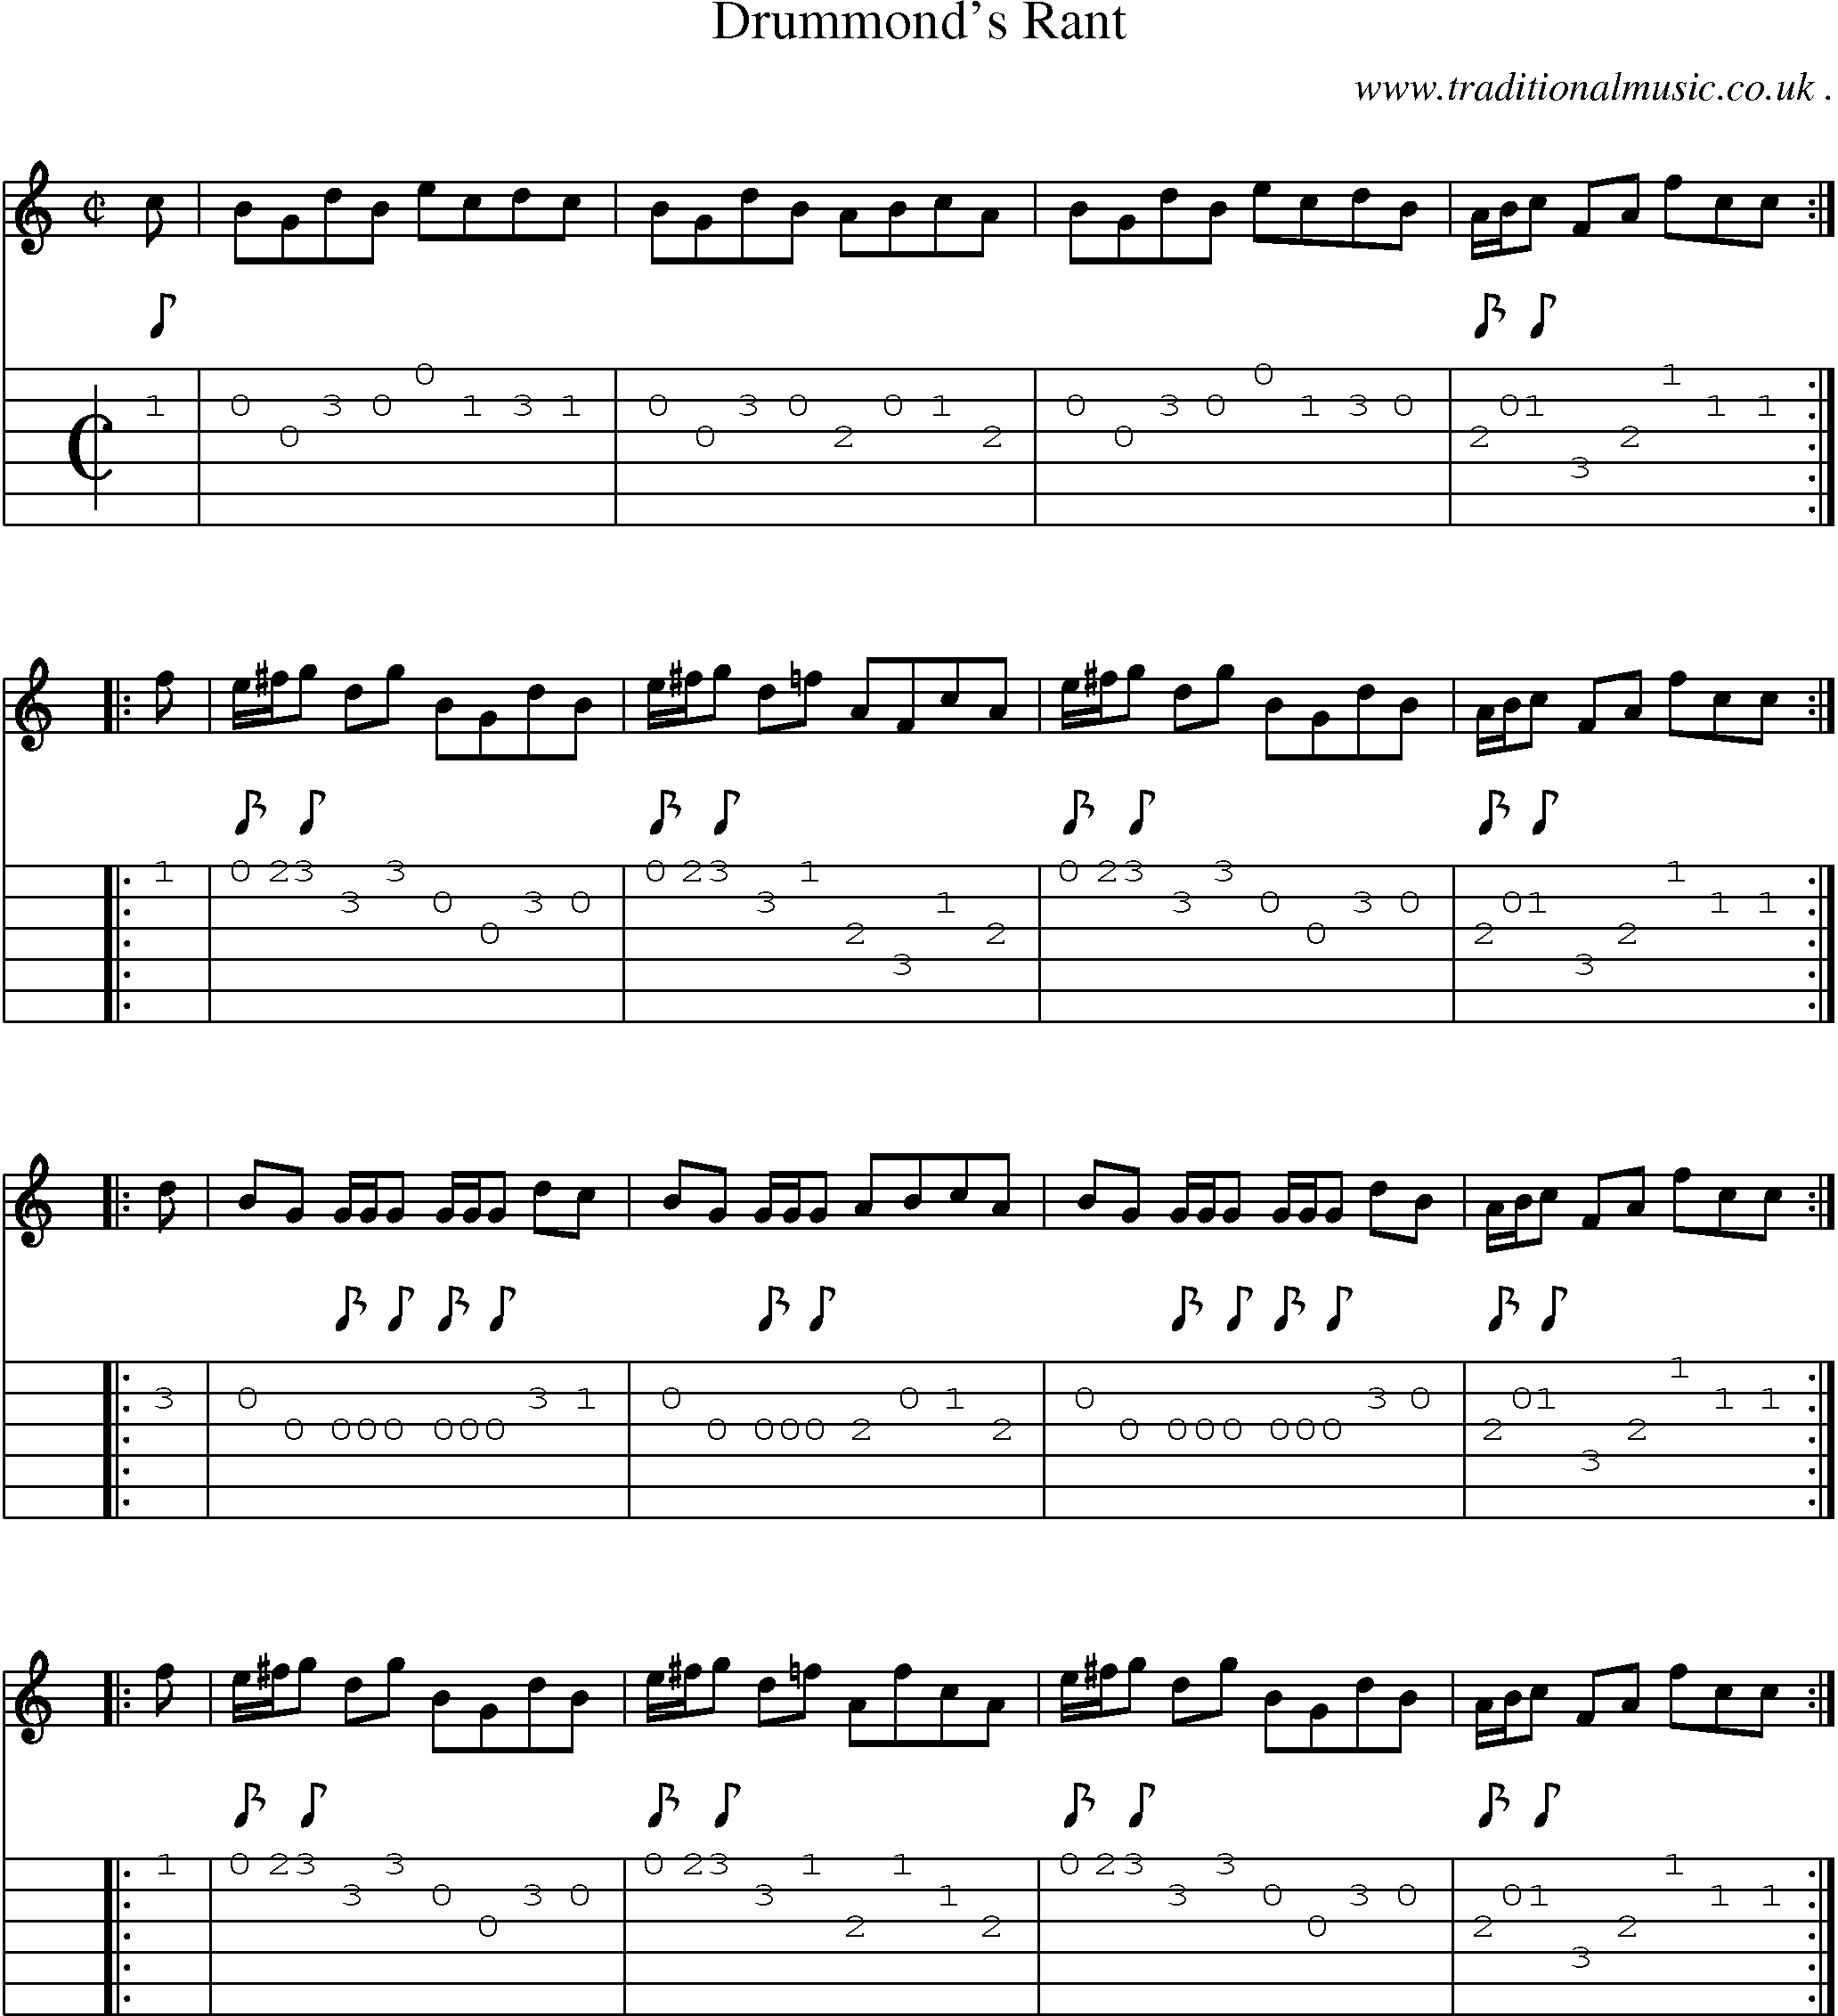 Sheet-music  score, Chords and Guitar Tabs for Drummonds Rant